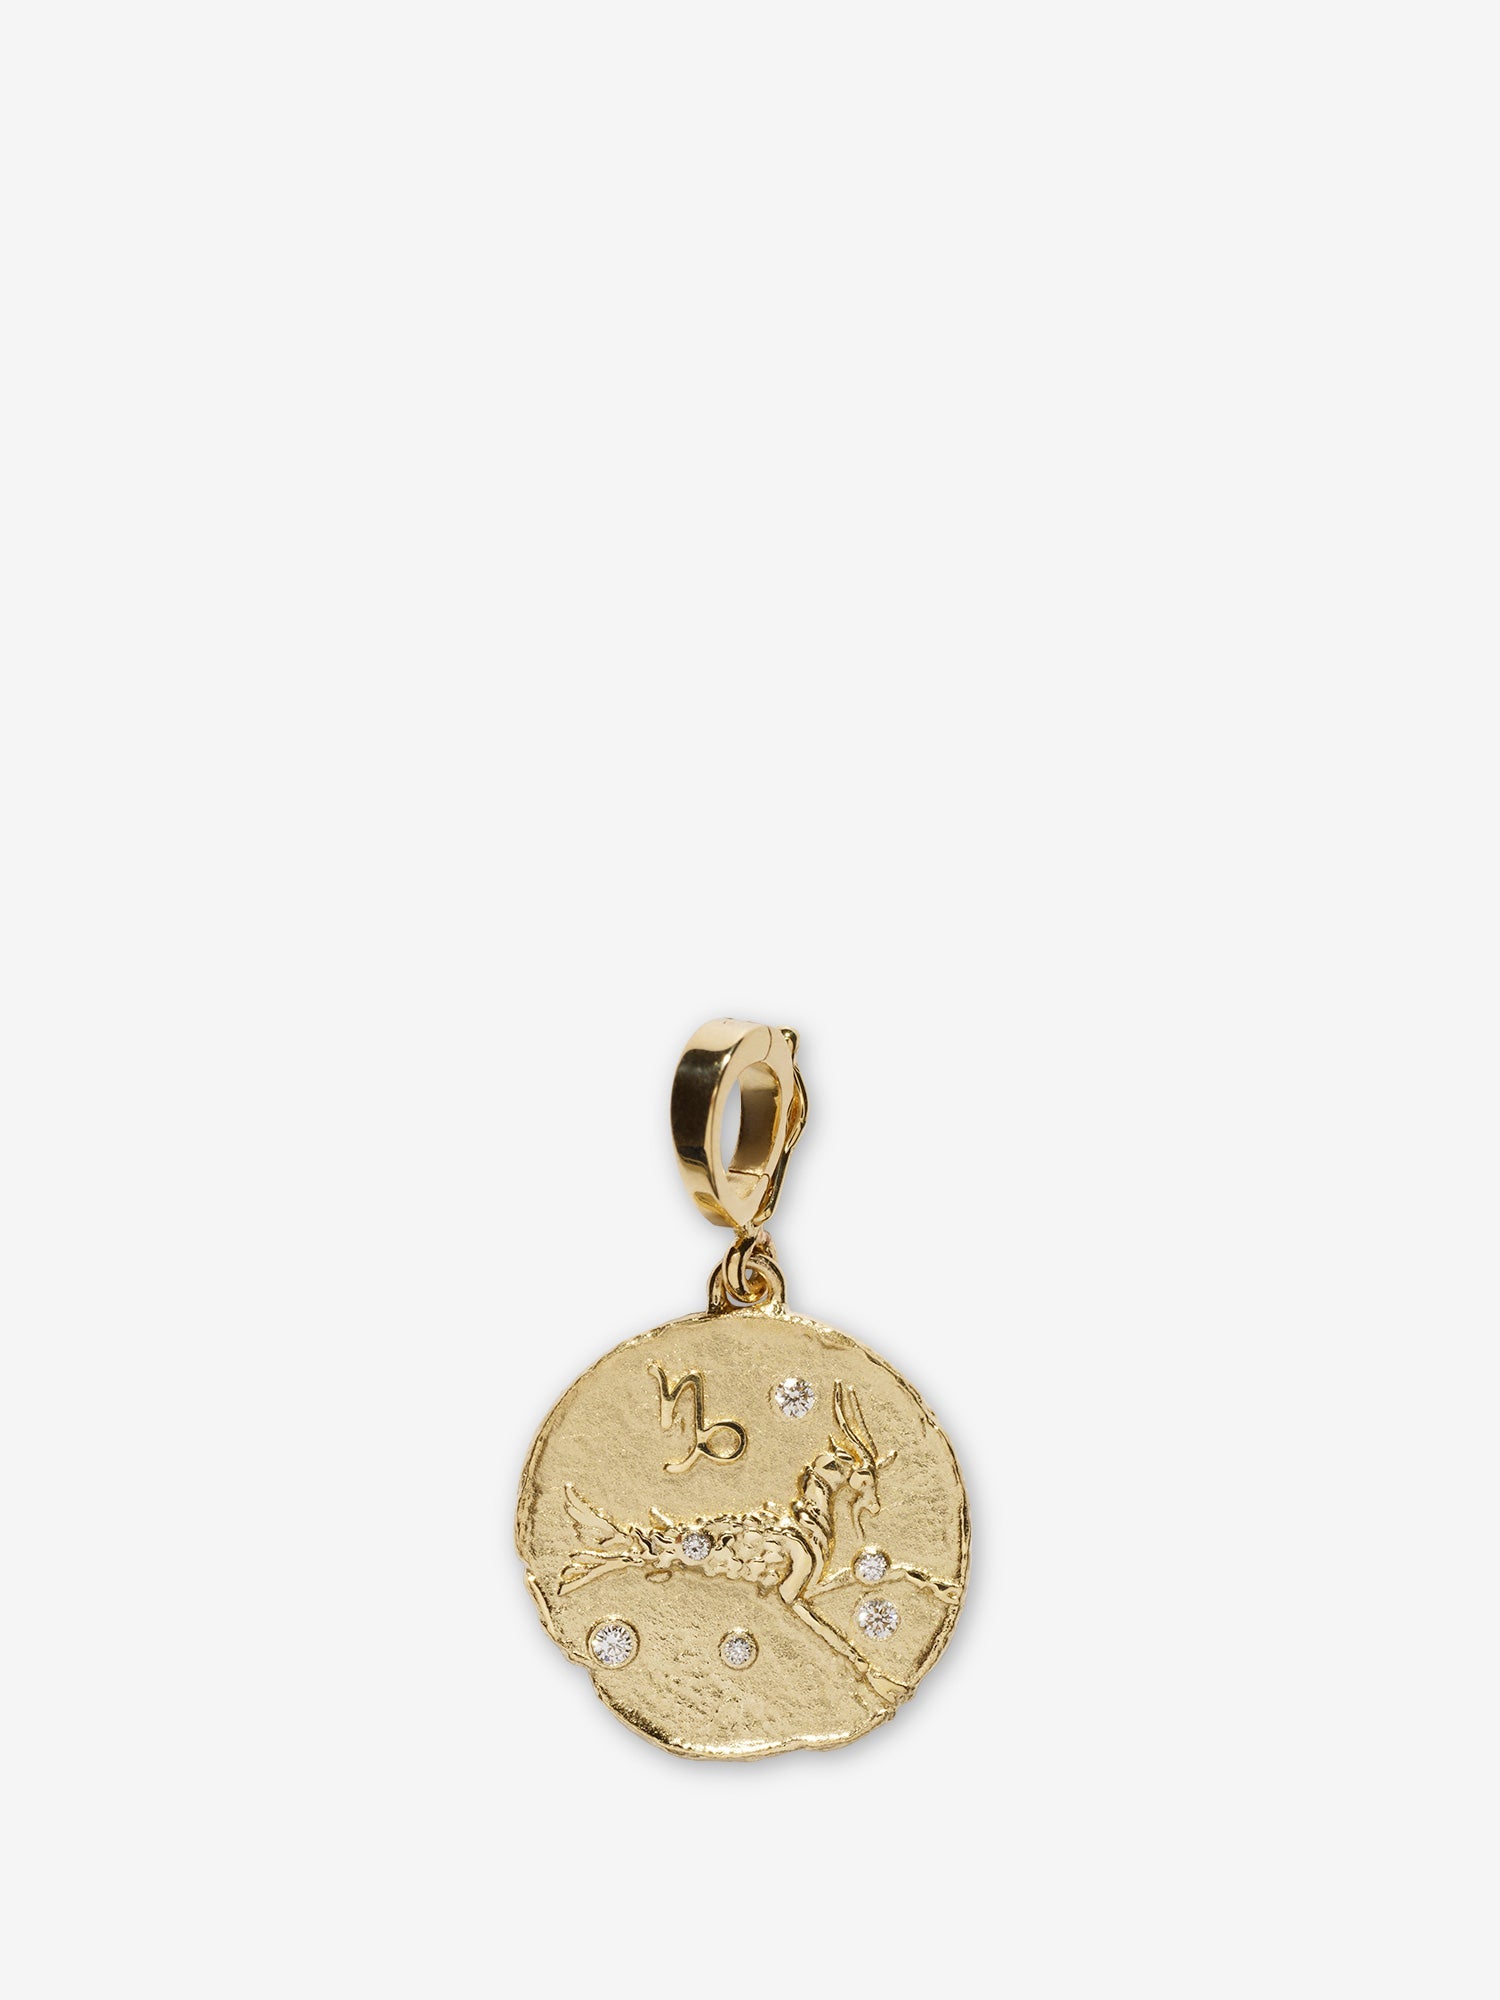 Of The Stars Capricorn Small Coin Charm